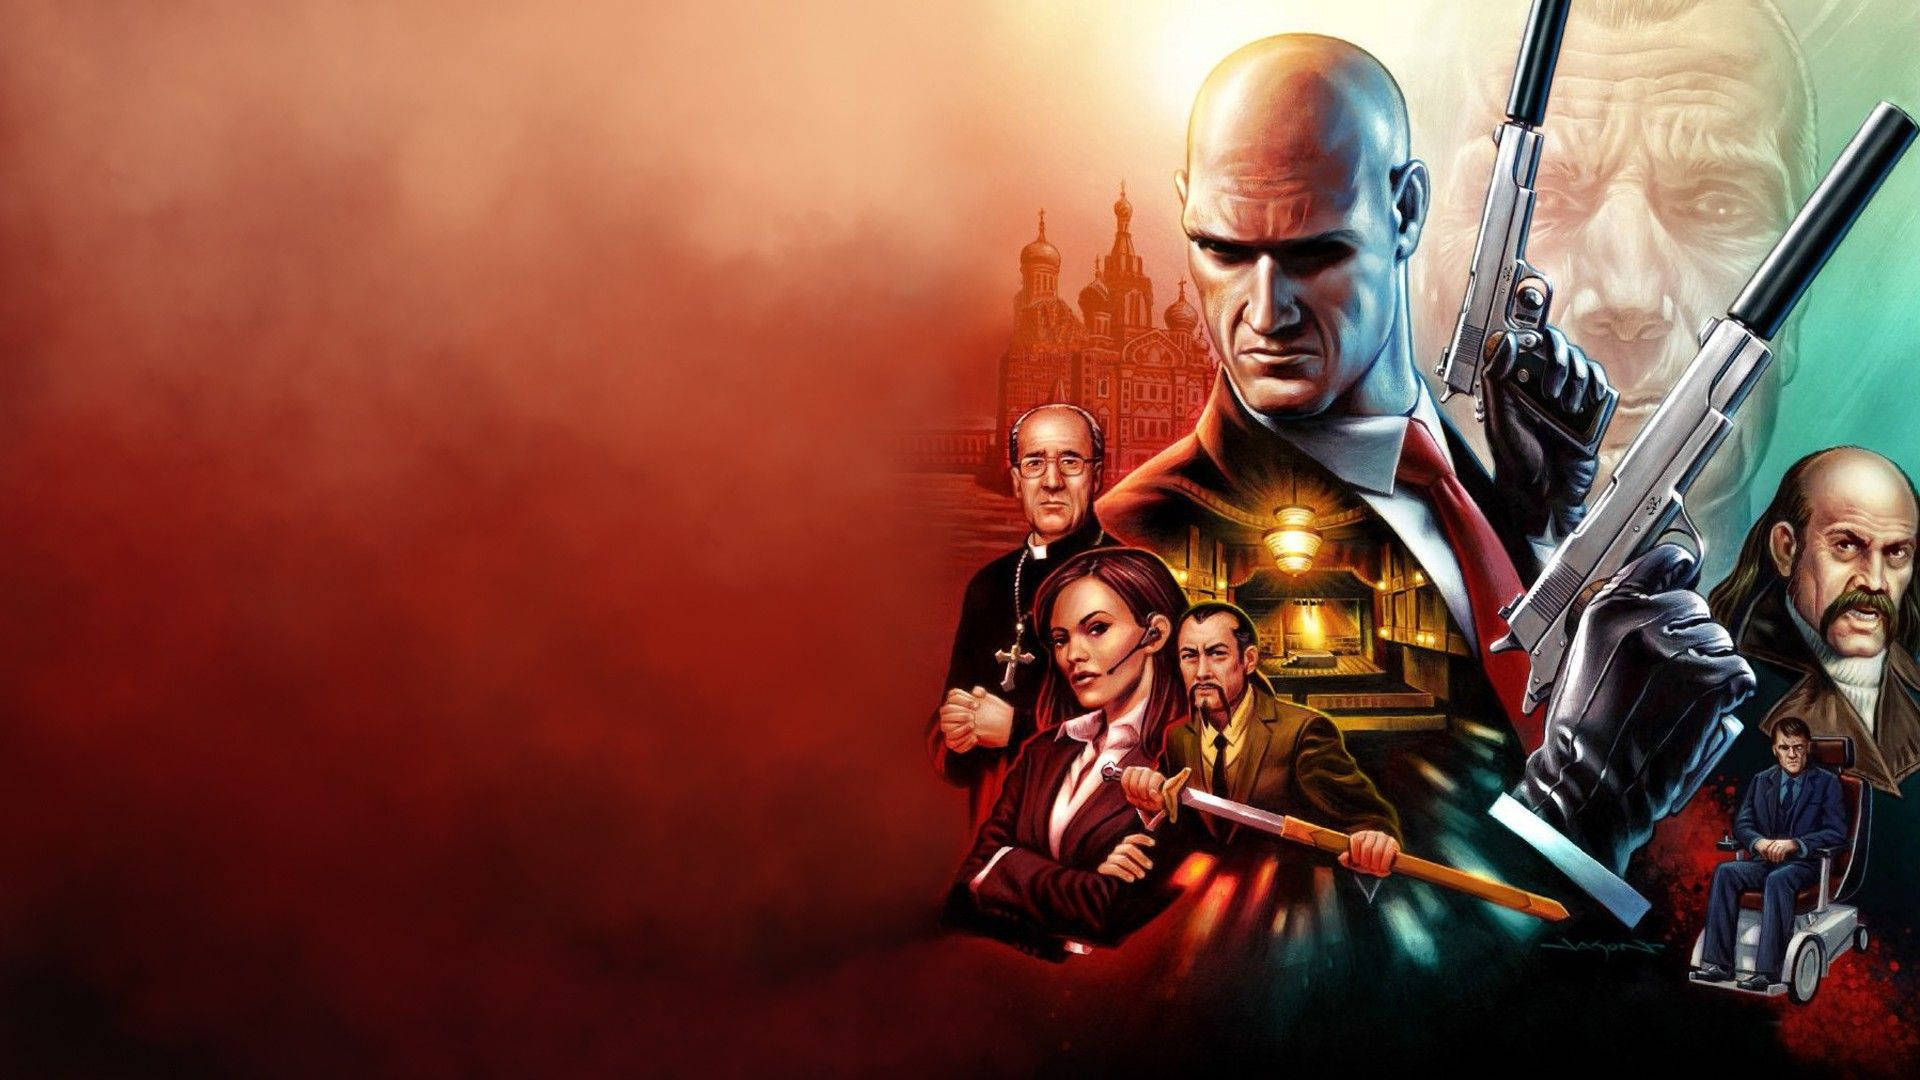 Cool Hitman Absolution Poster